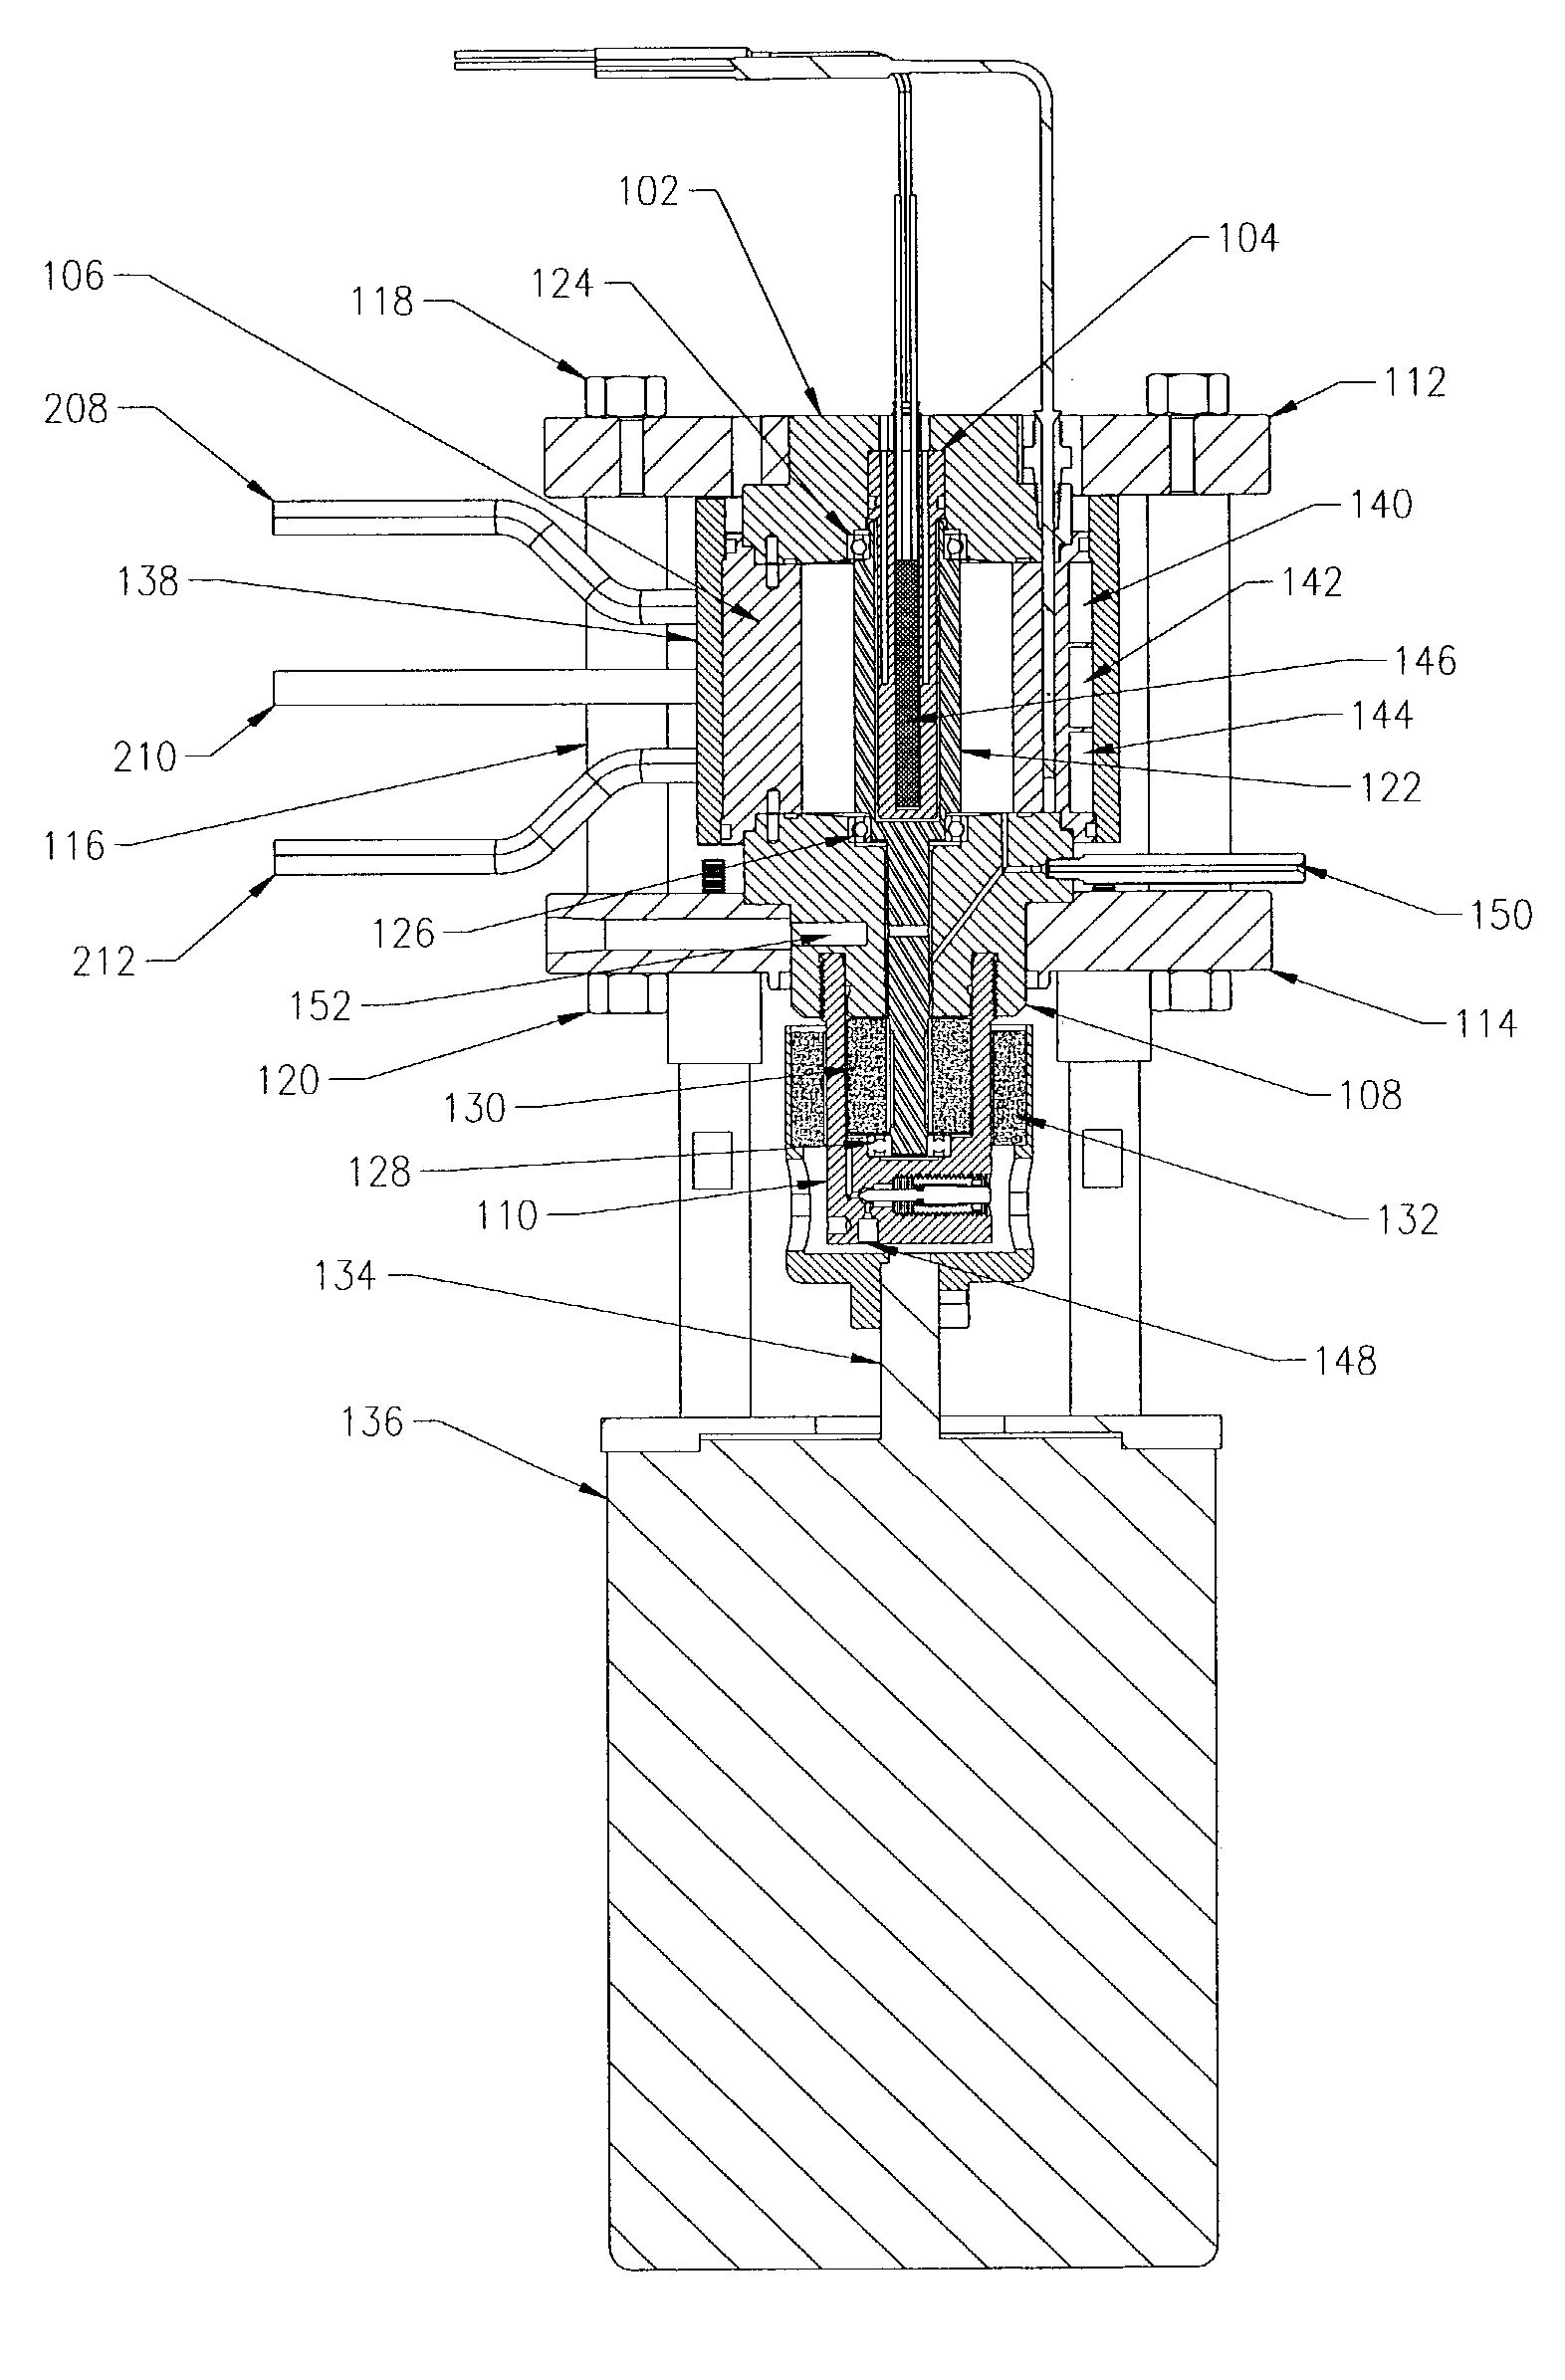 Couette device and method to study solids deposition from flowing fluids